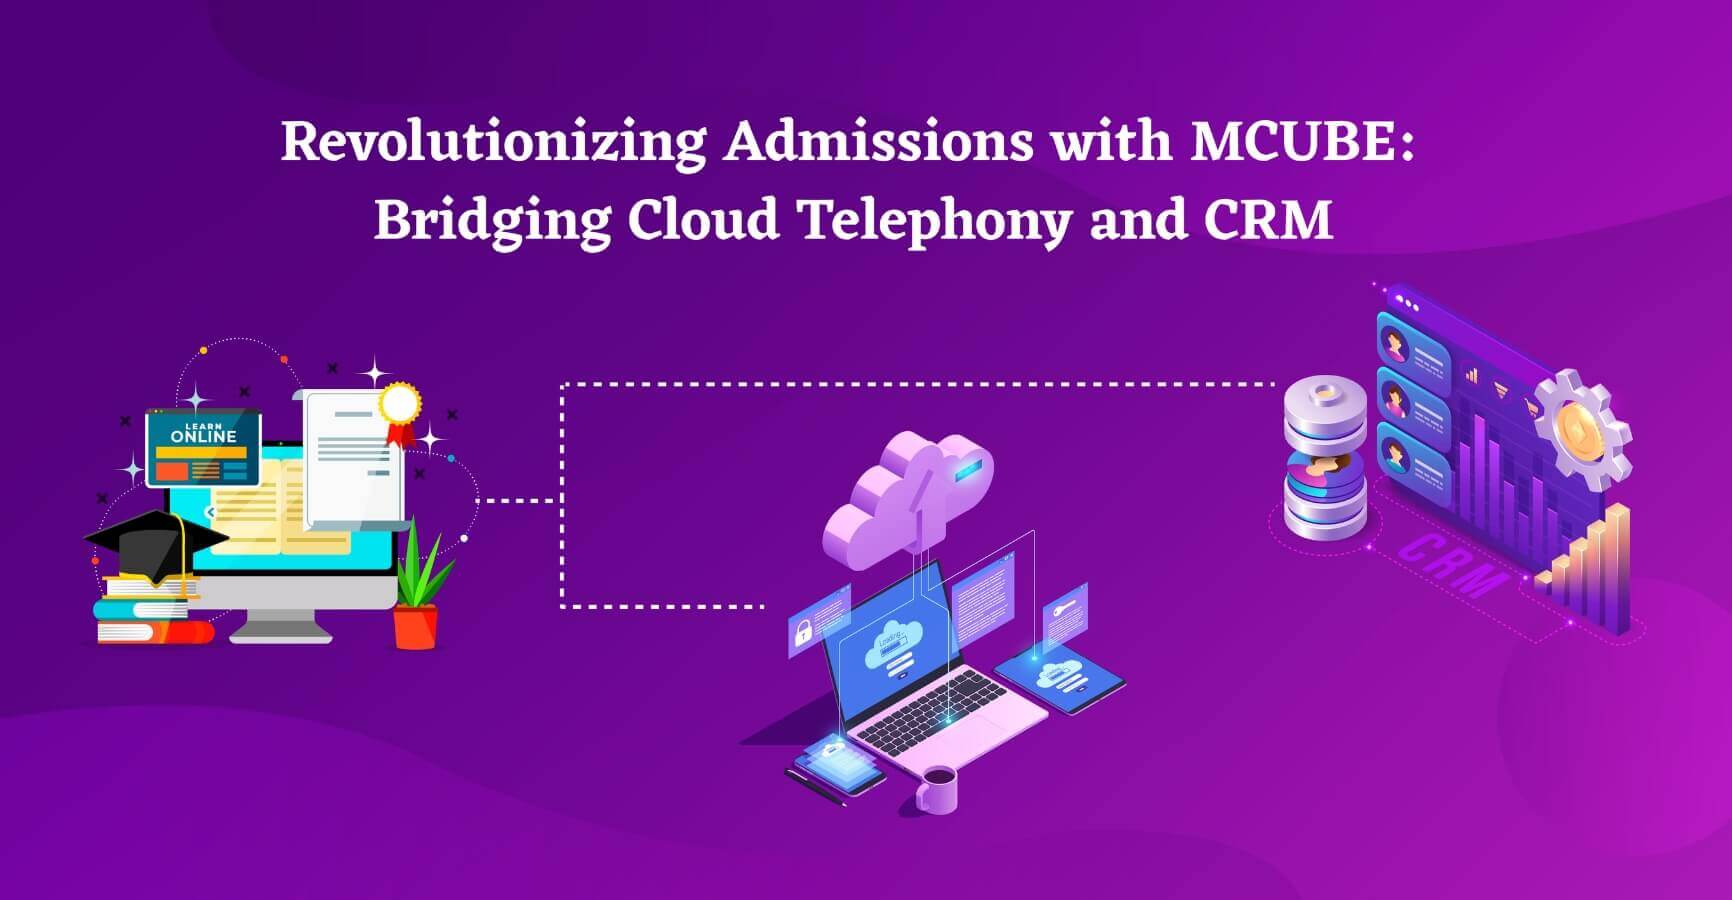 Revolutionizing Admissions with MCUBE: Bridging Cloud Telephony and CRM